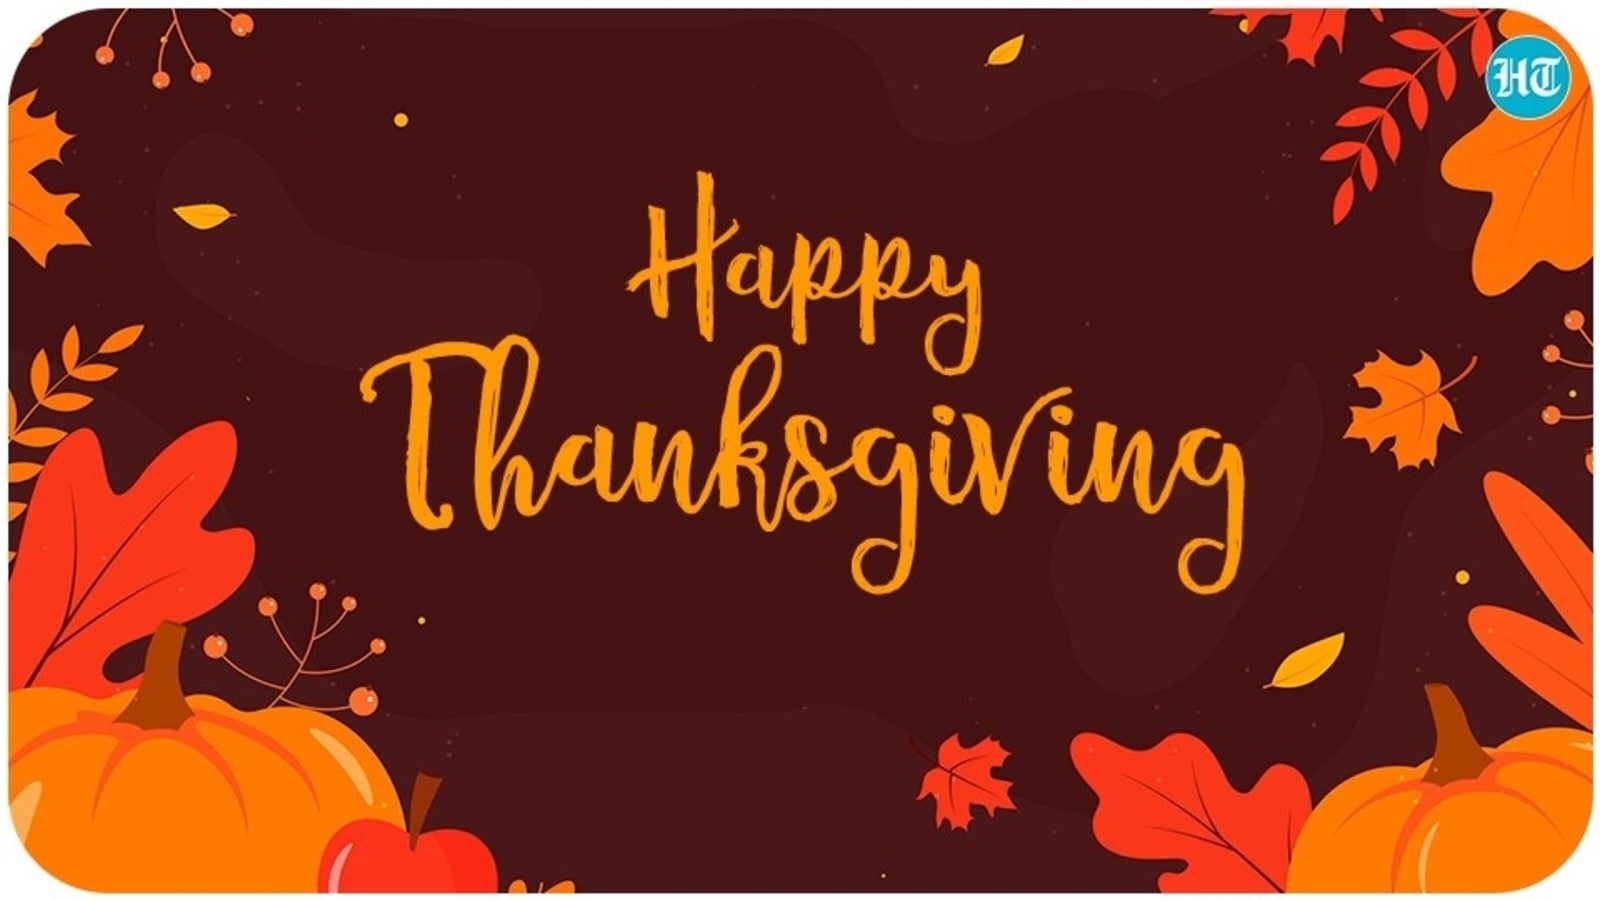 Happy Thanksgiving 2021: Wishes, images, messages and greetings to